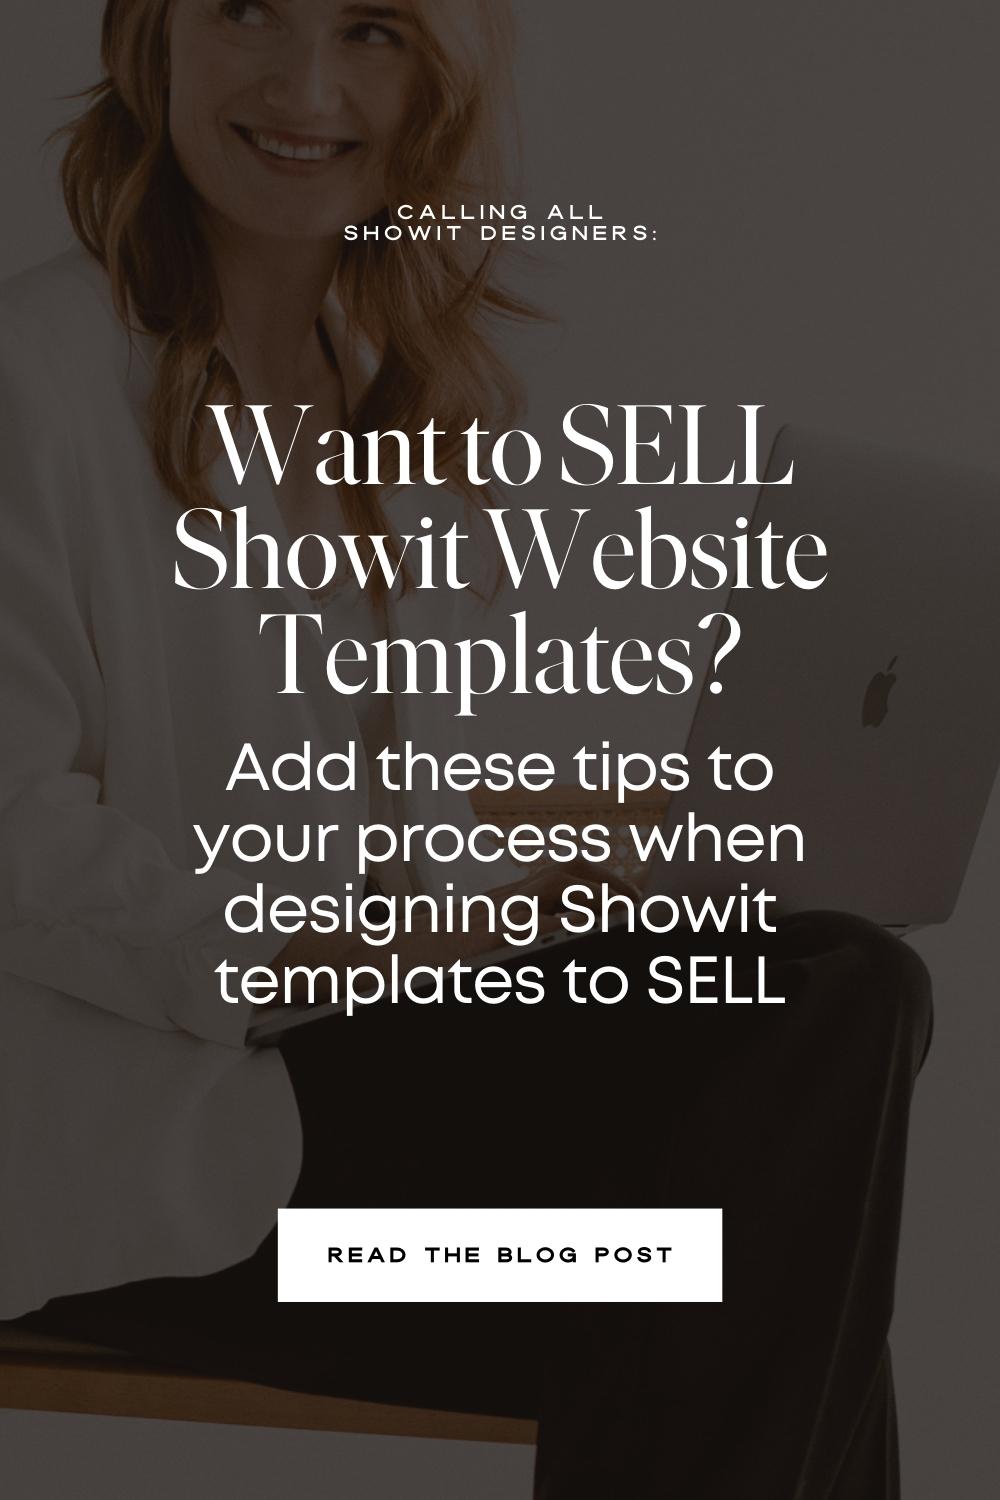 Steal Our Top 5 Tips for Designing Showit Website Templates